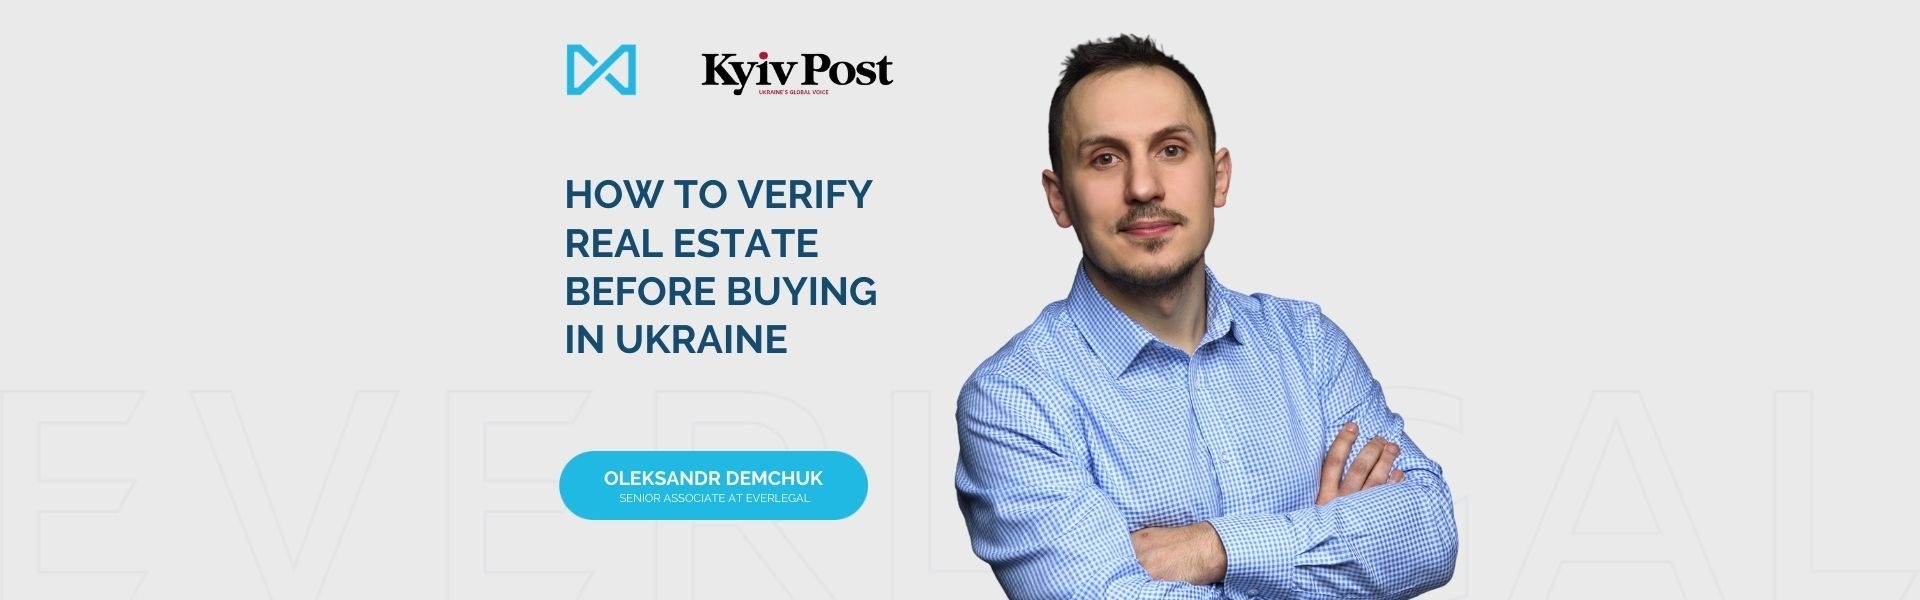 How to verify real estate before buying in Ukraine